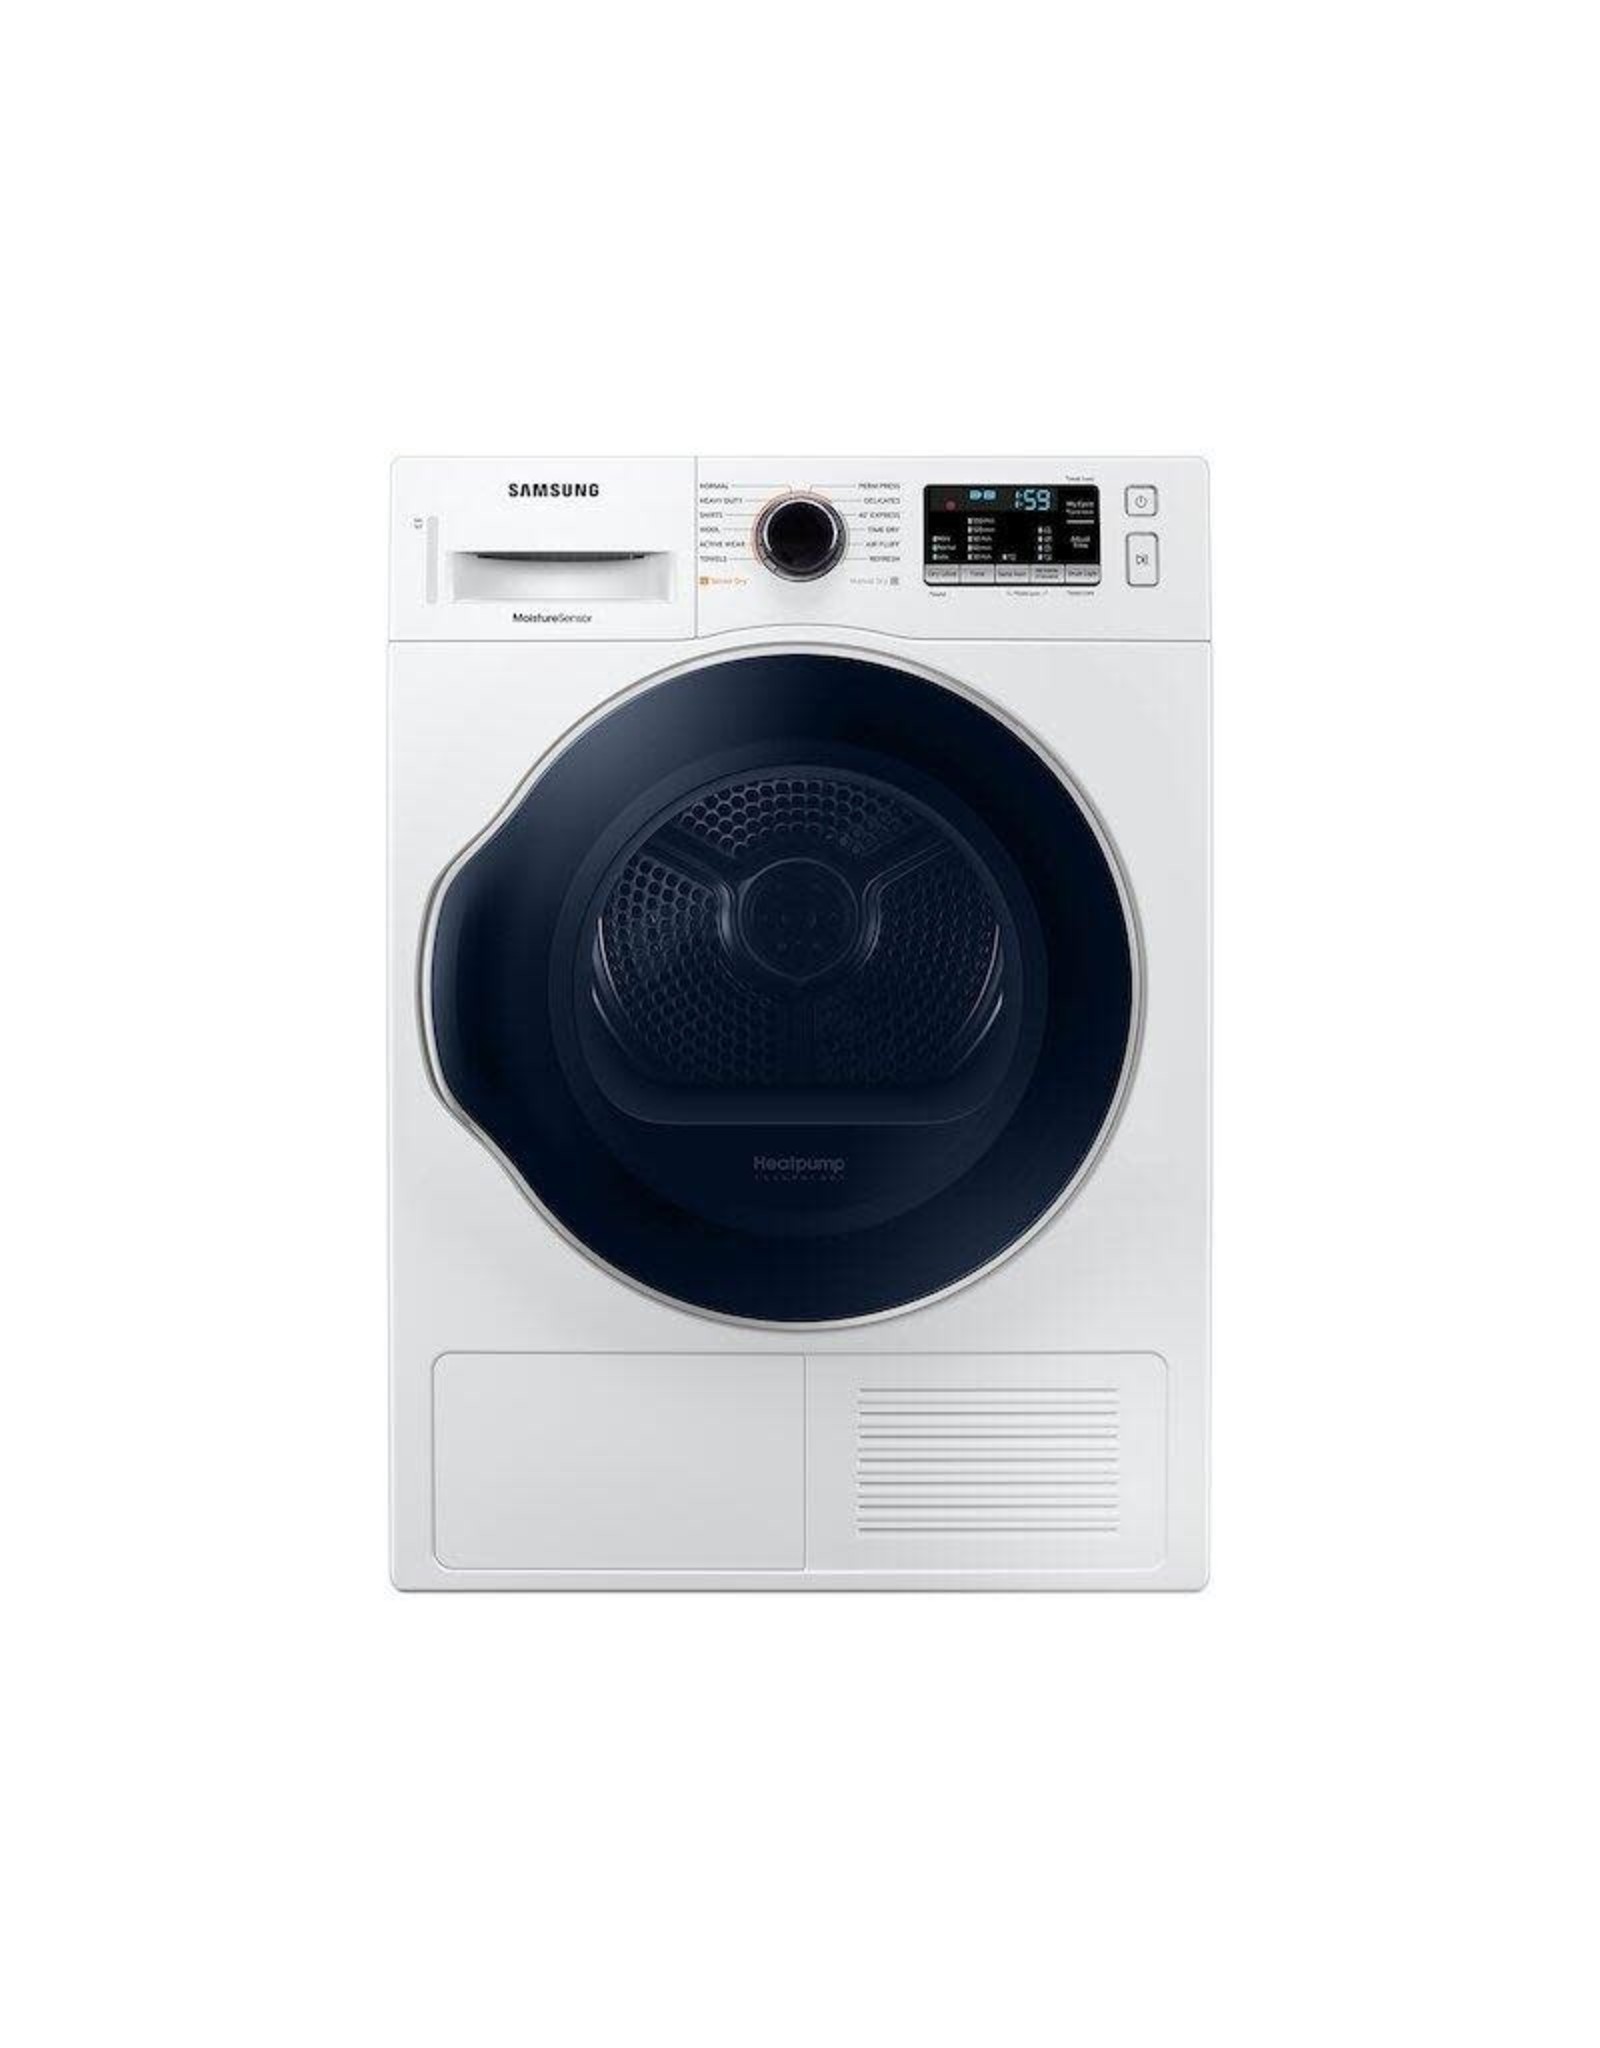 Samsung 4.0 cu. ft. Capacity White 24 Stackable Electric Ventless Heat Pump Dryer ENERGY STAR Certified